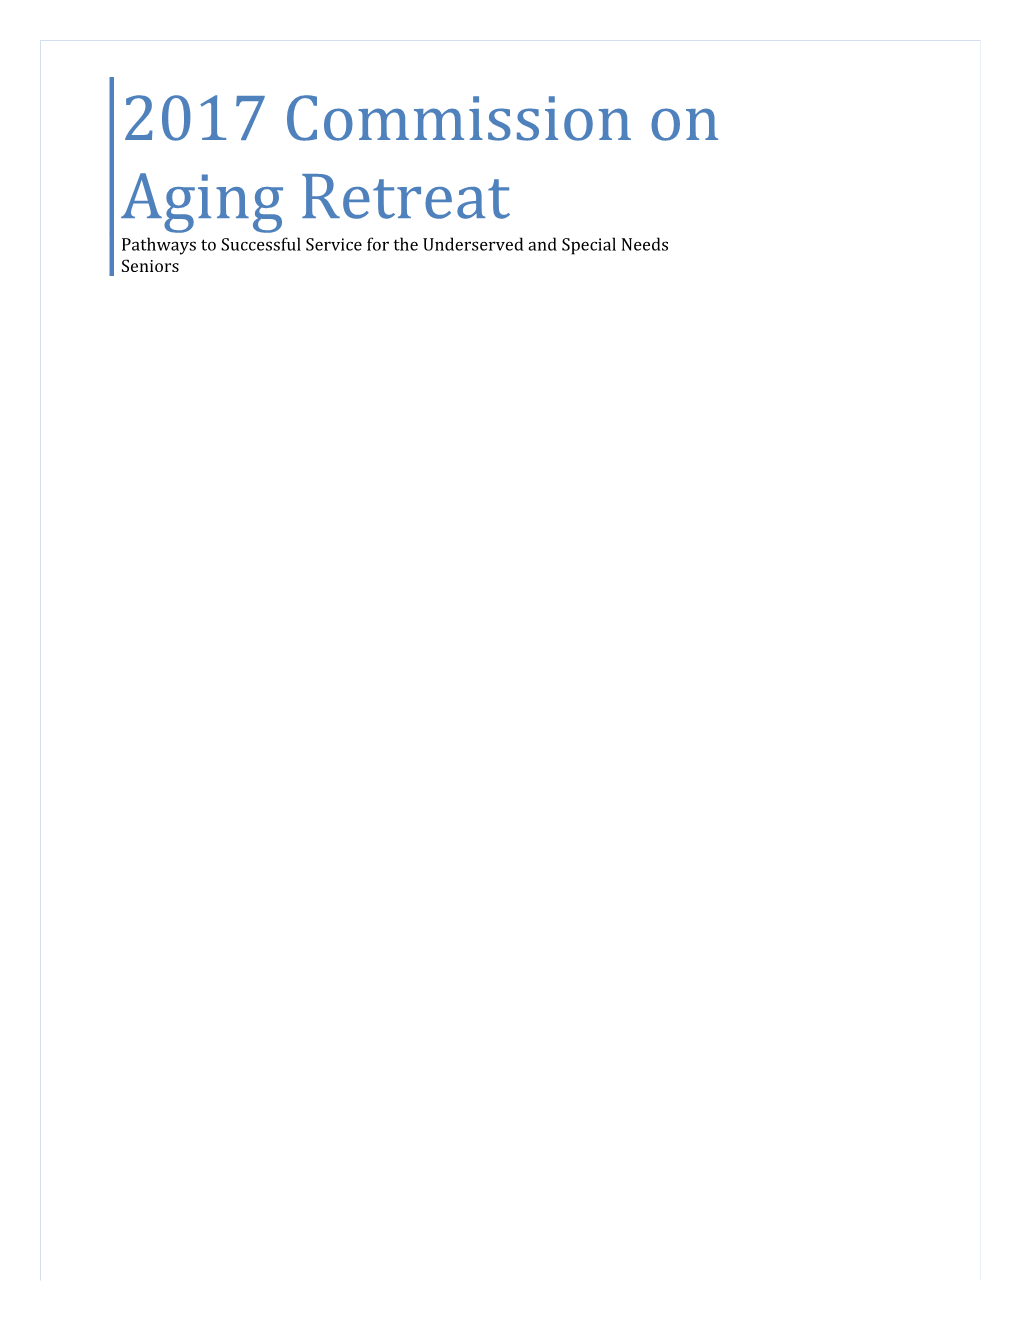 2017 Commission on Aging Retreat